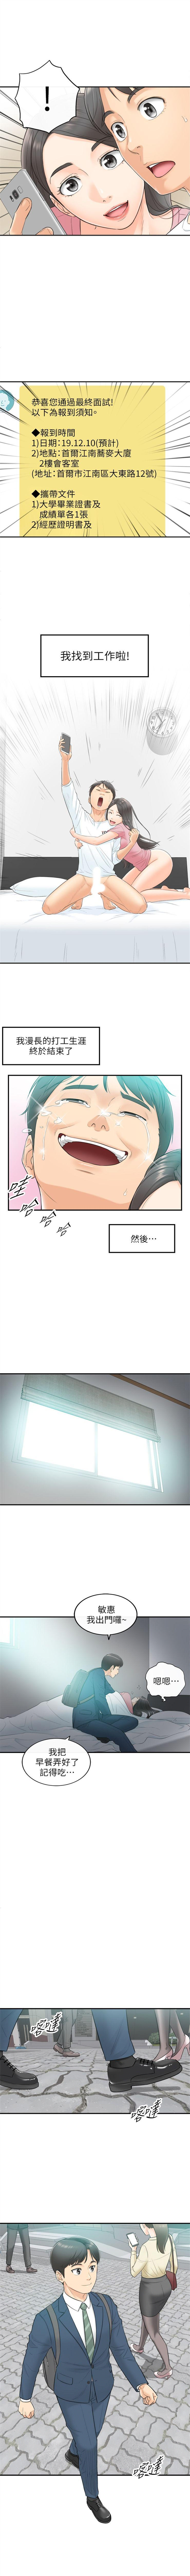 Culo 正妹小主管 1-62 官方中文（連載中） Staxxx - Page 8